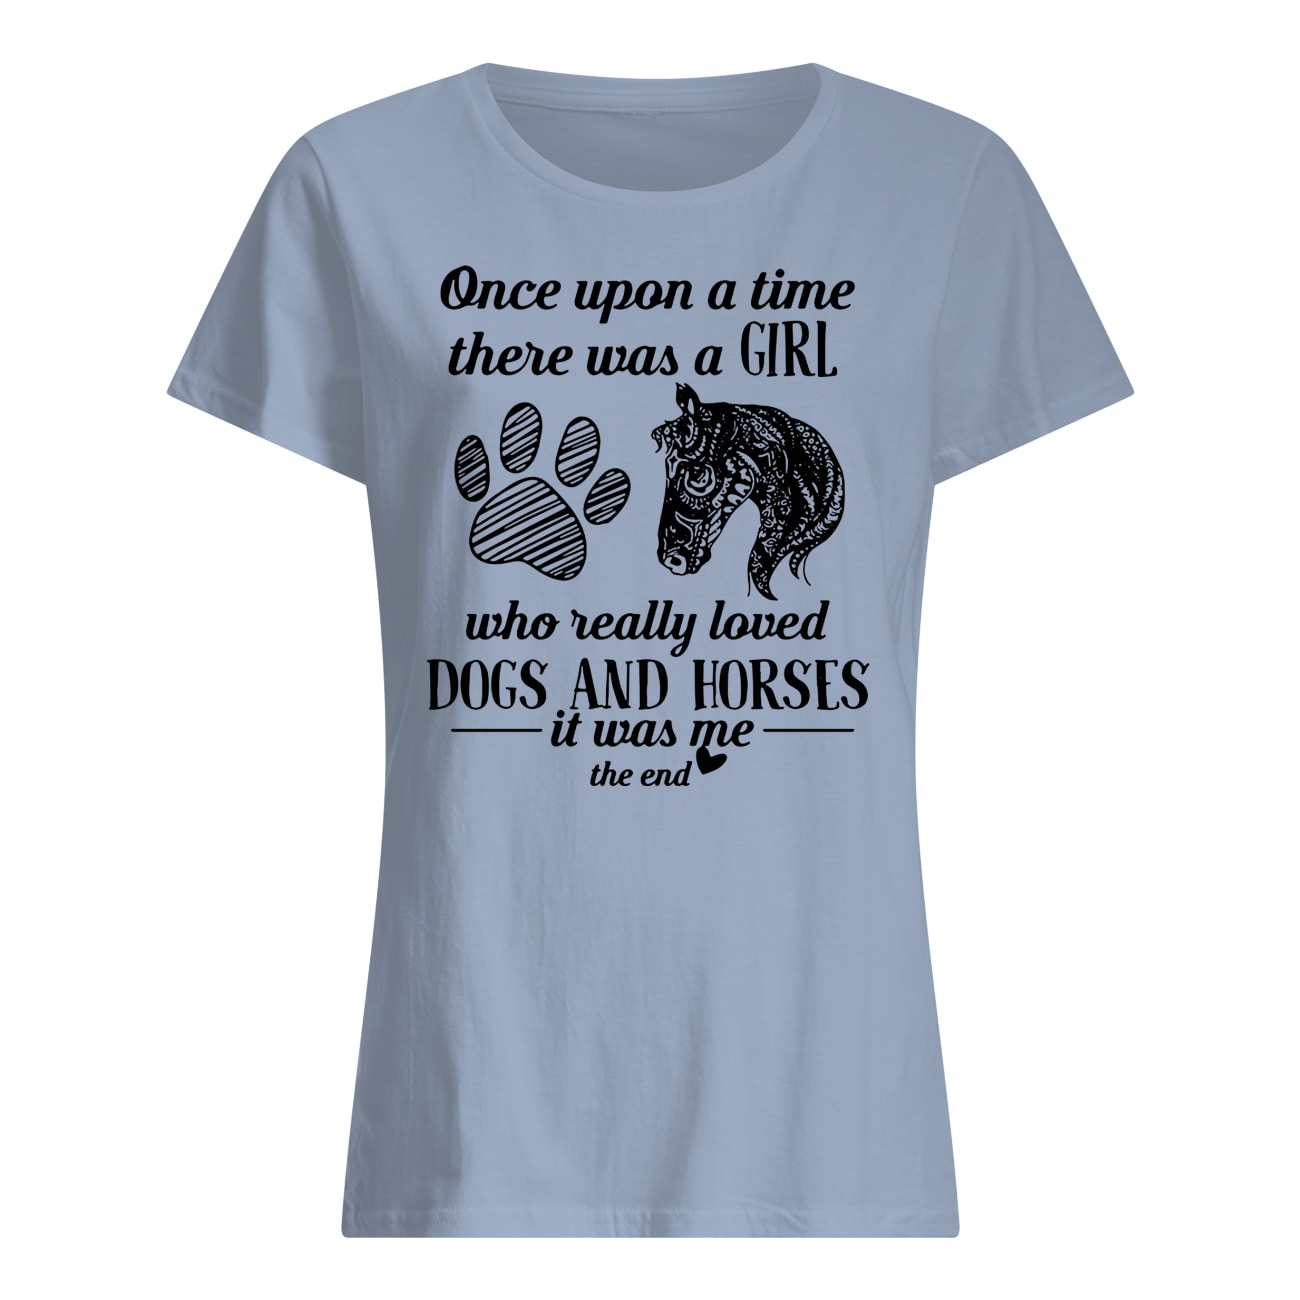 Once upon a time there was a girl who really loved dogs and horses it was me lady shirt